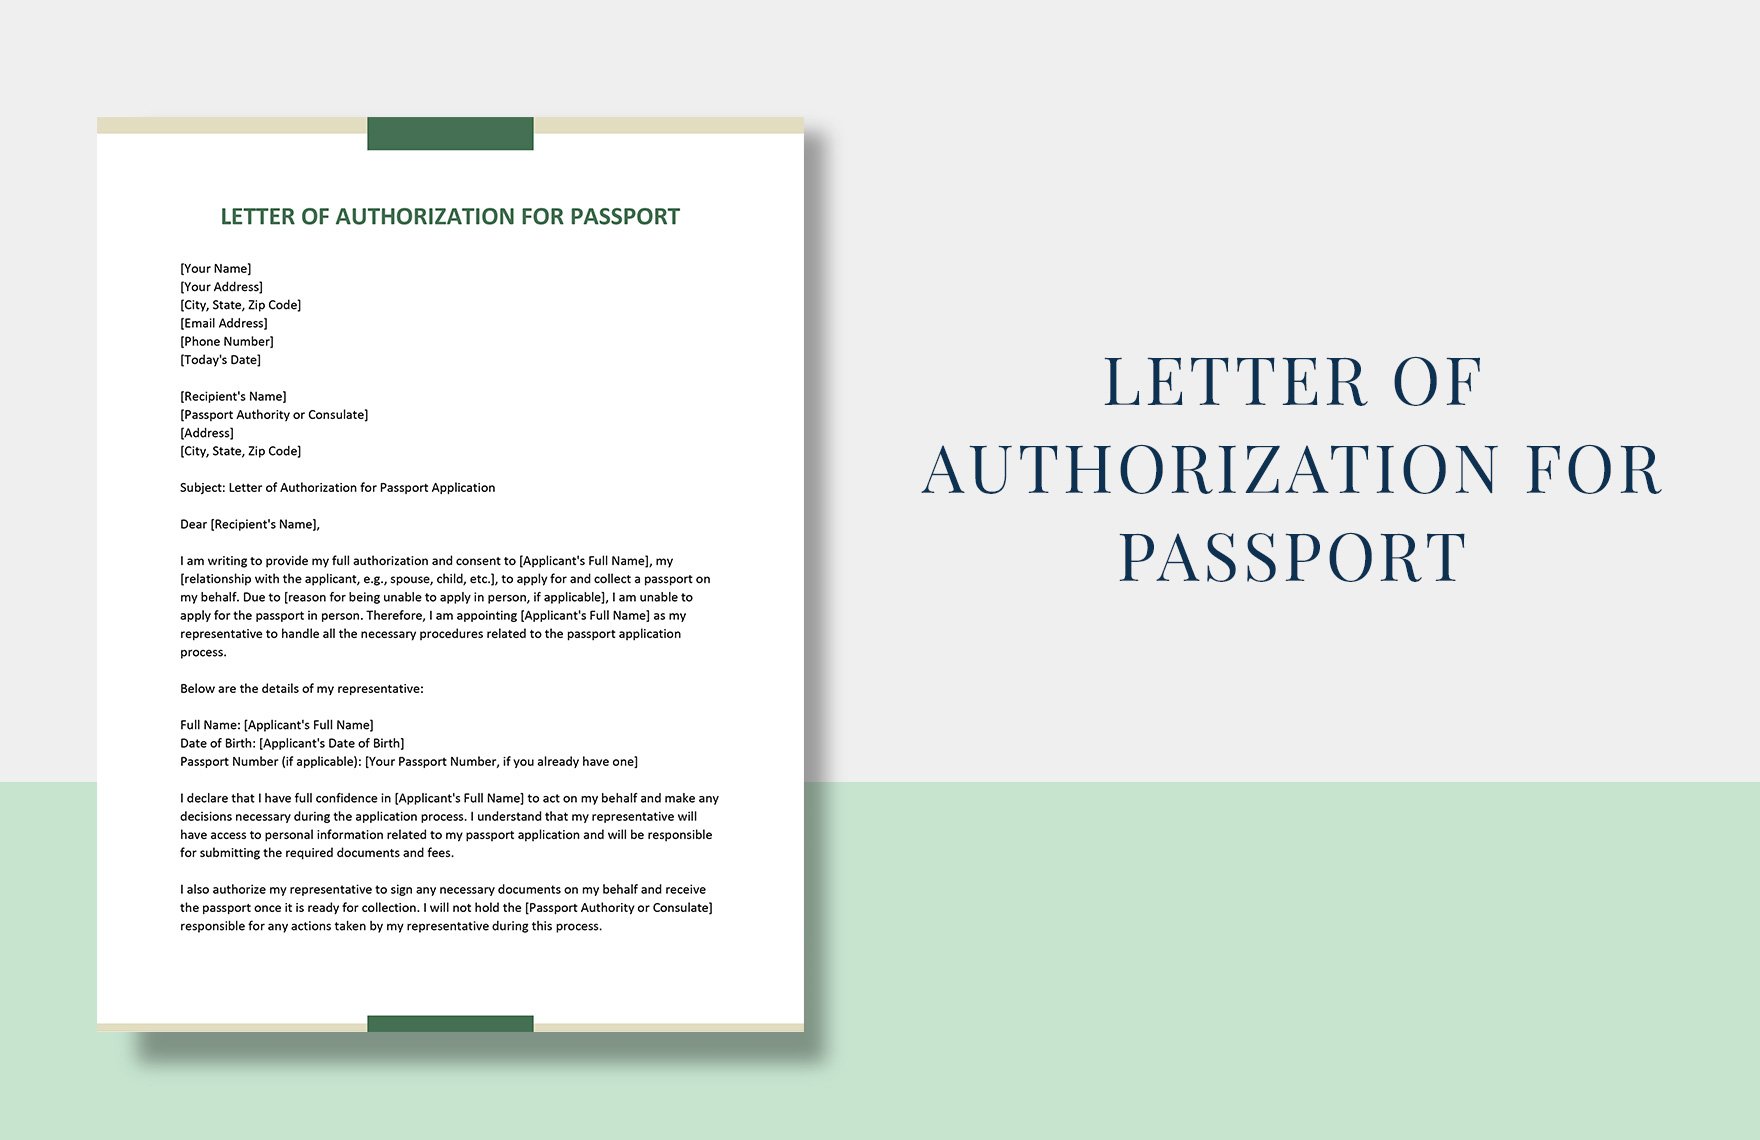 Letter of Authorization for Passport